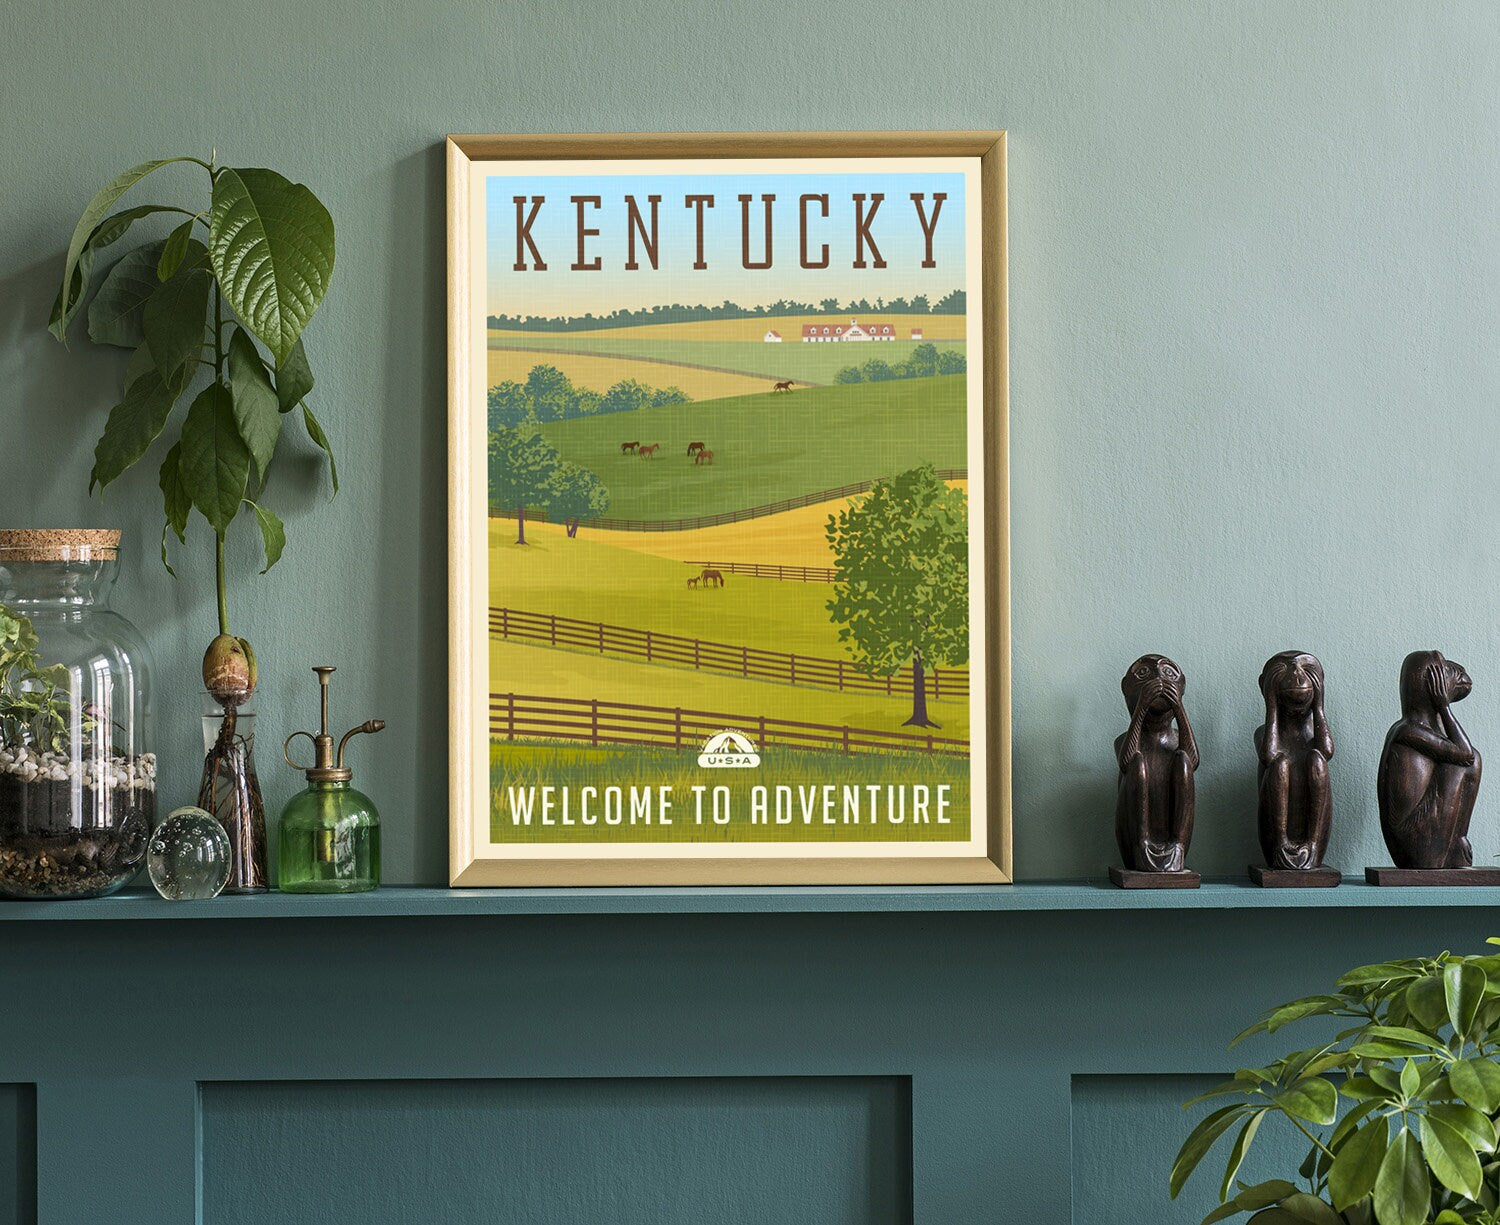 Retro Style Travel Poster, Kentucky Vintage Rustic Poster Print, Home Wall Art, Office Wall Decor, Poster Prints, Kentucky, State Map Poster